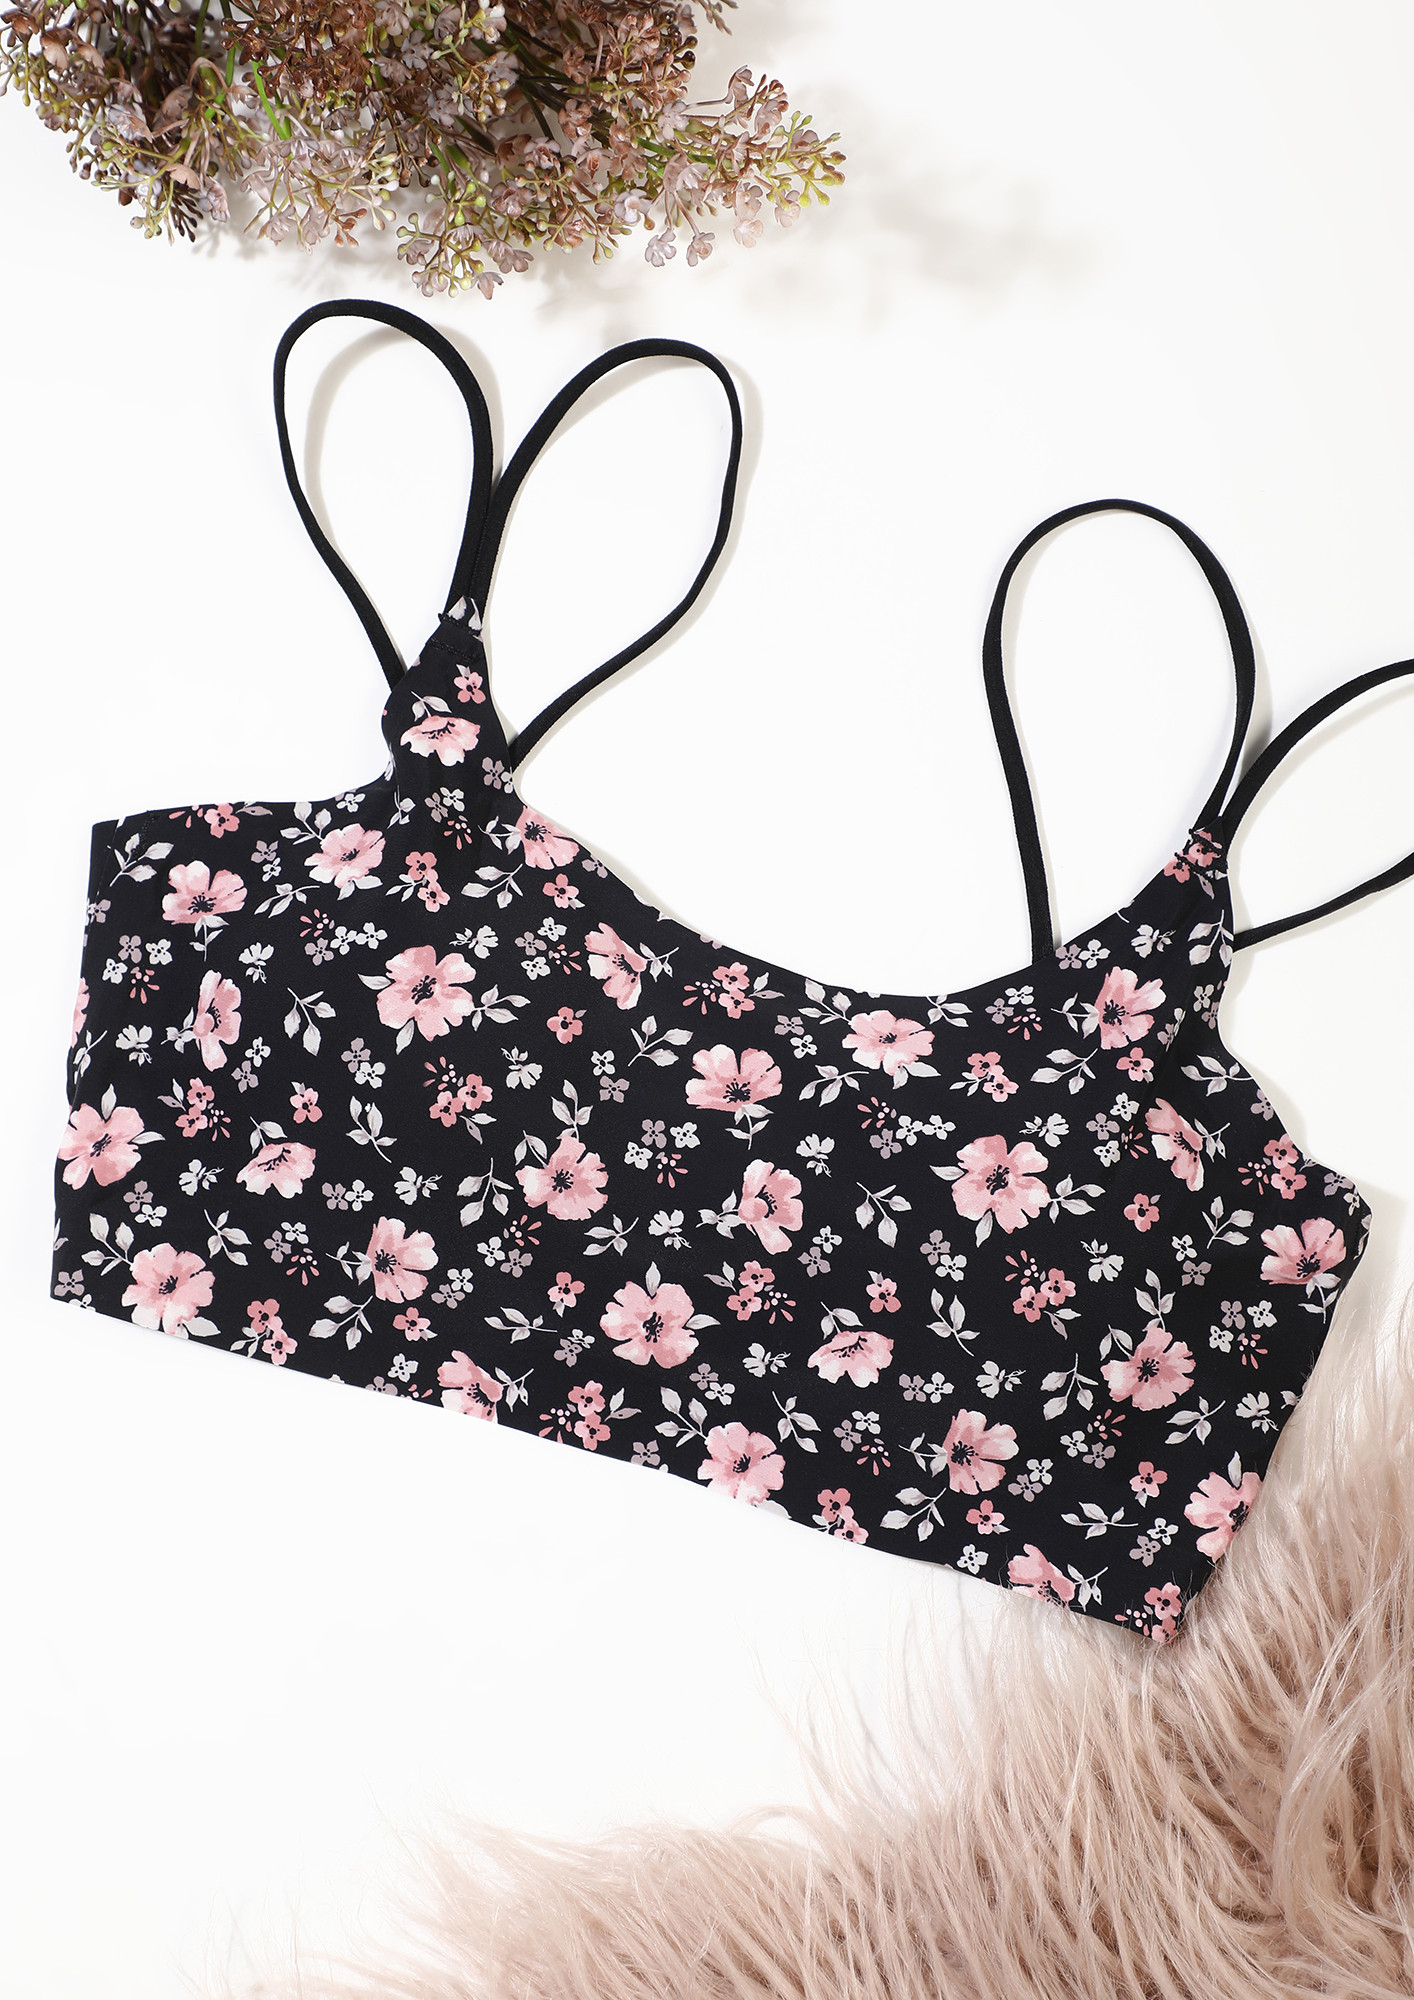 DOUBLE STRAPPED BLACK FLORAL BRALETTE